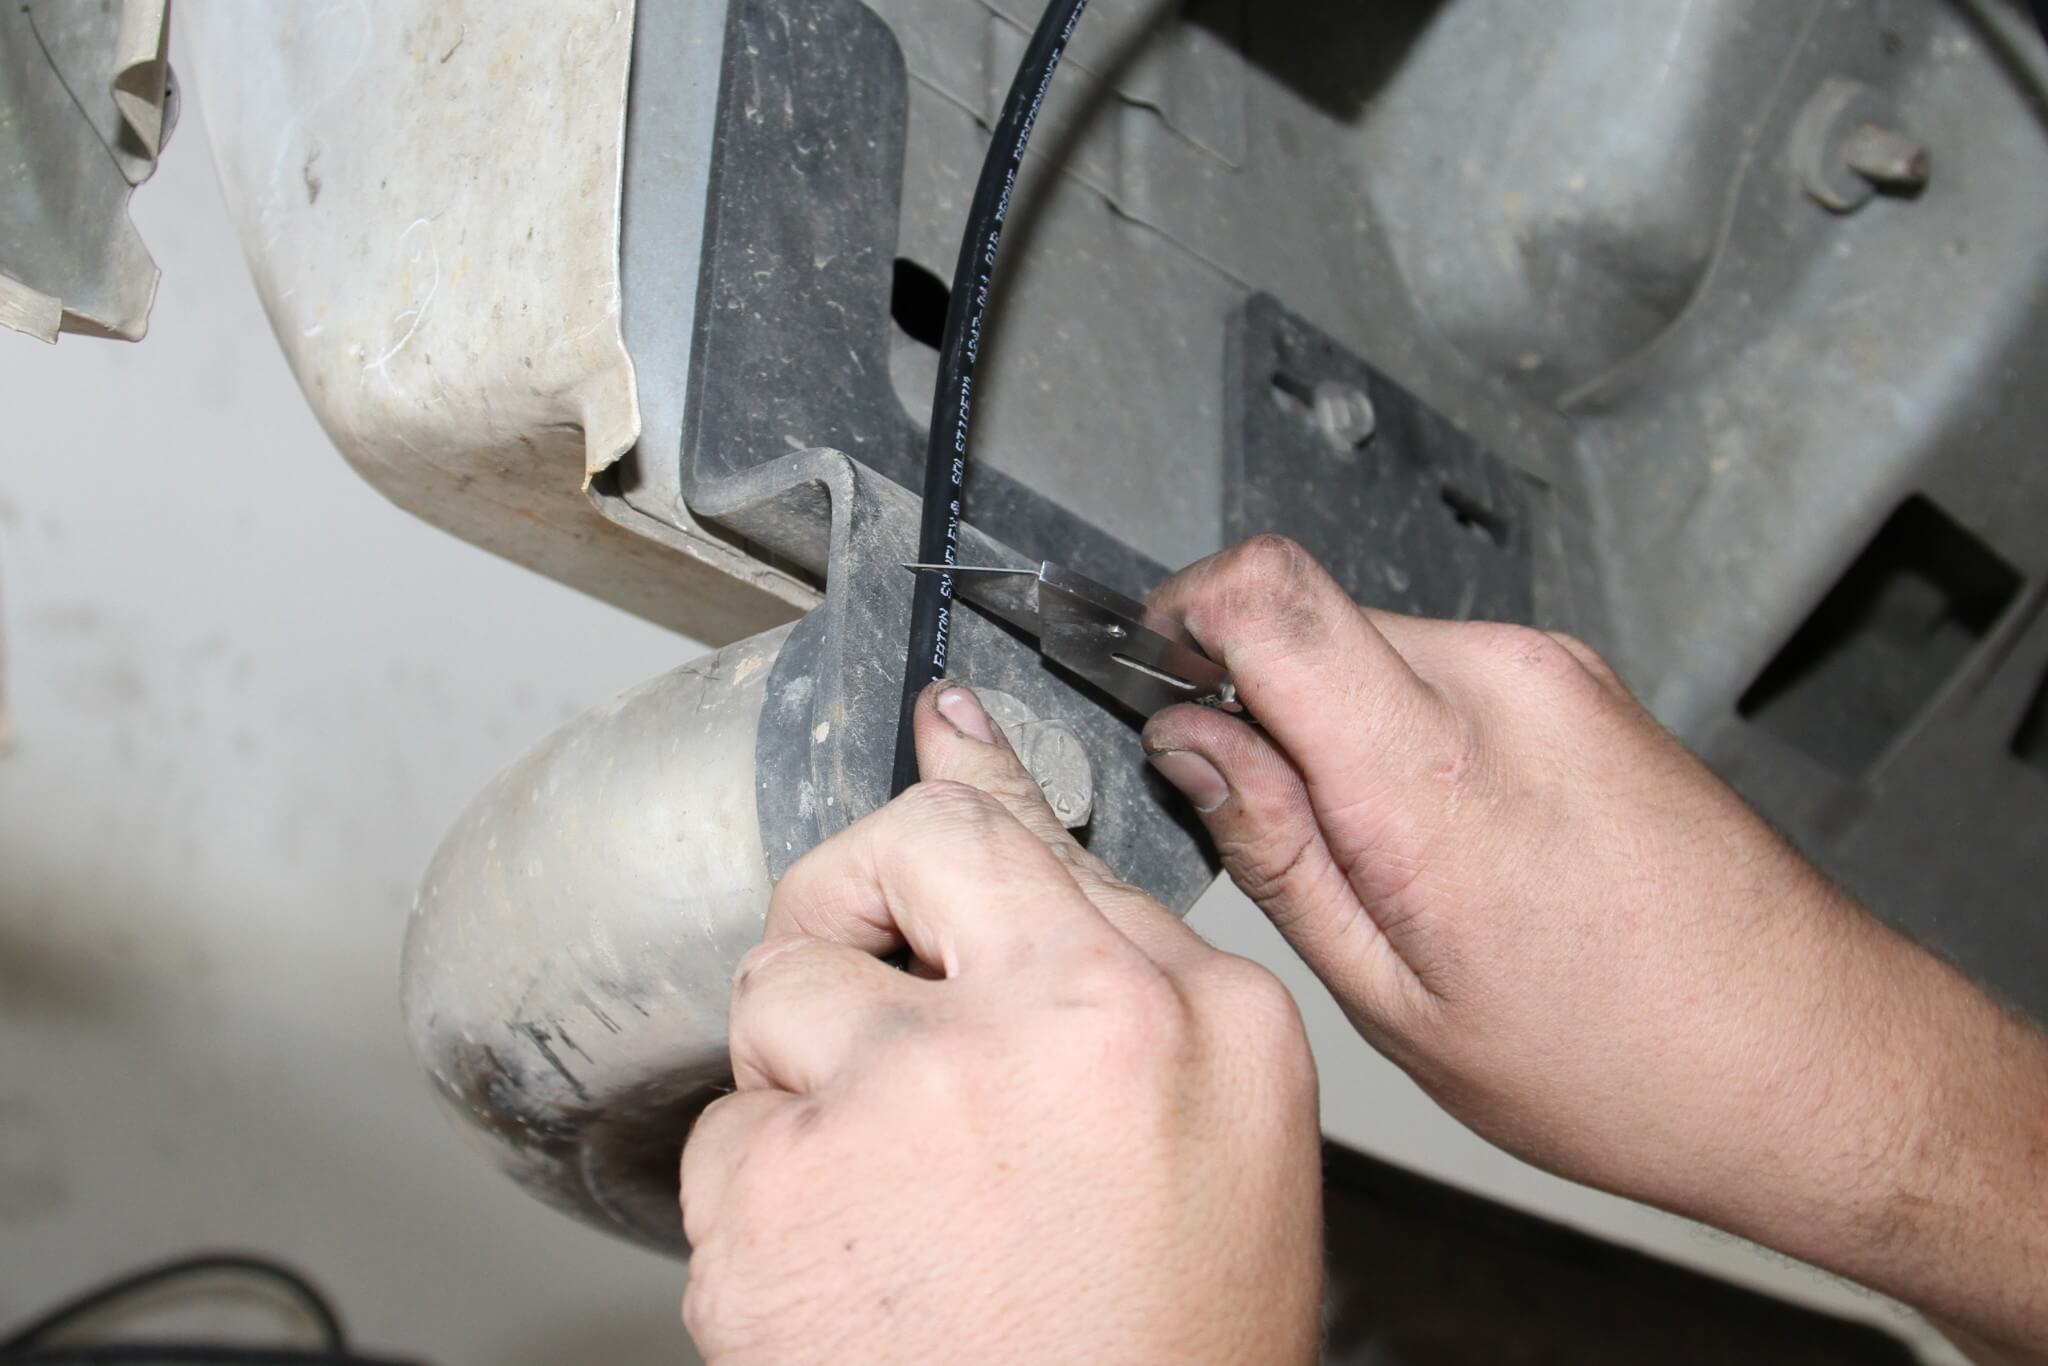 16. The fittings supplied with the Air Lift systems use a push-lock connection point that requires a clean 90-degree cut in the air line so Carter uses a sharp razor knife to cut the air line to length. 